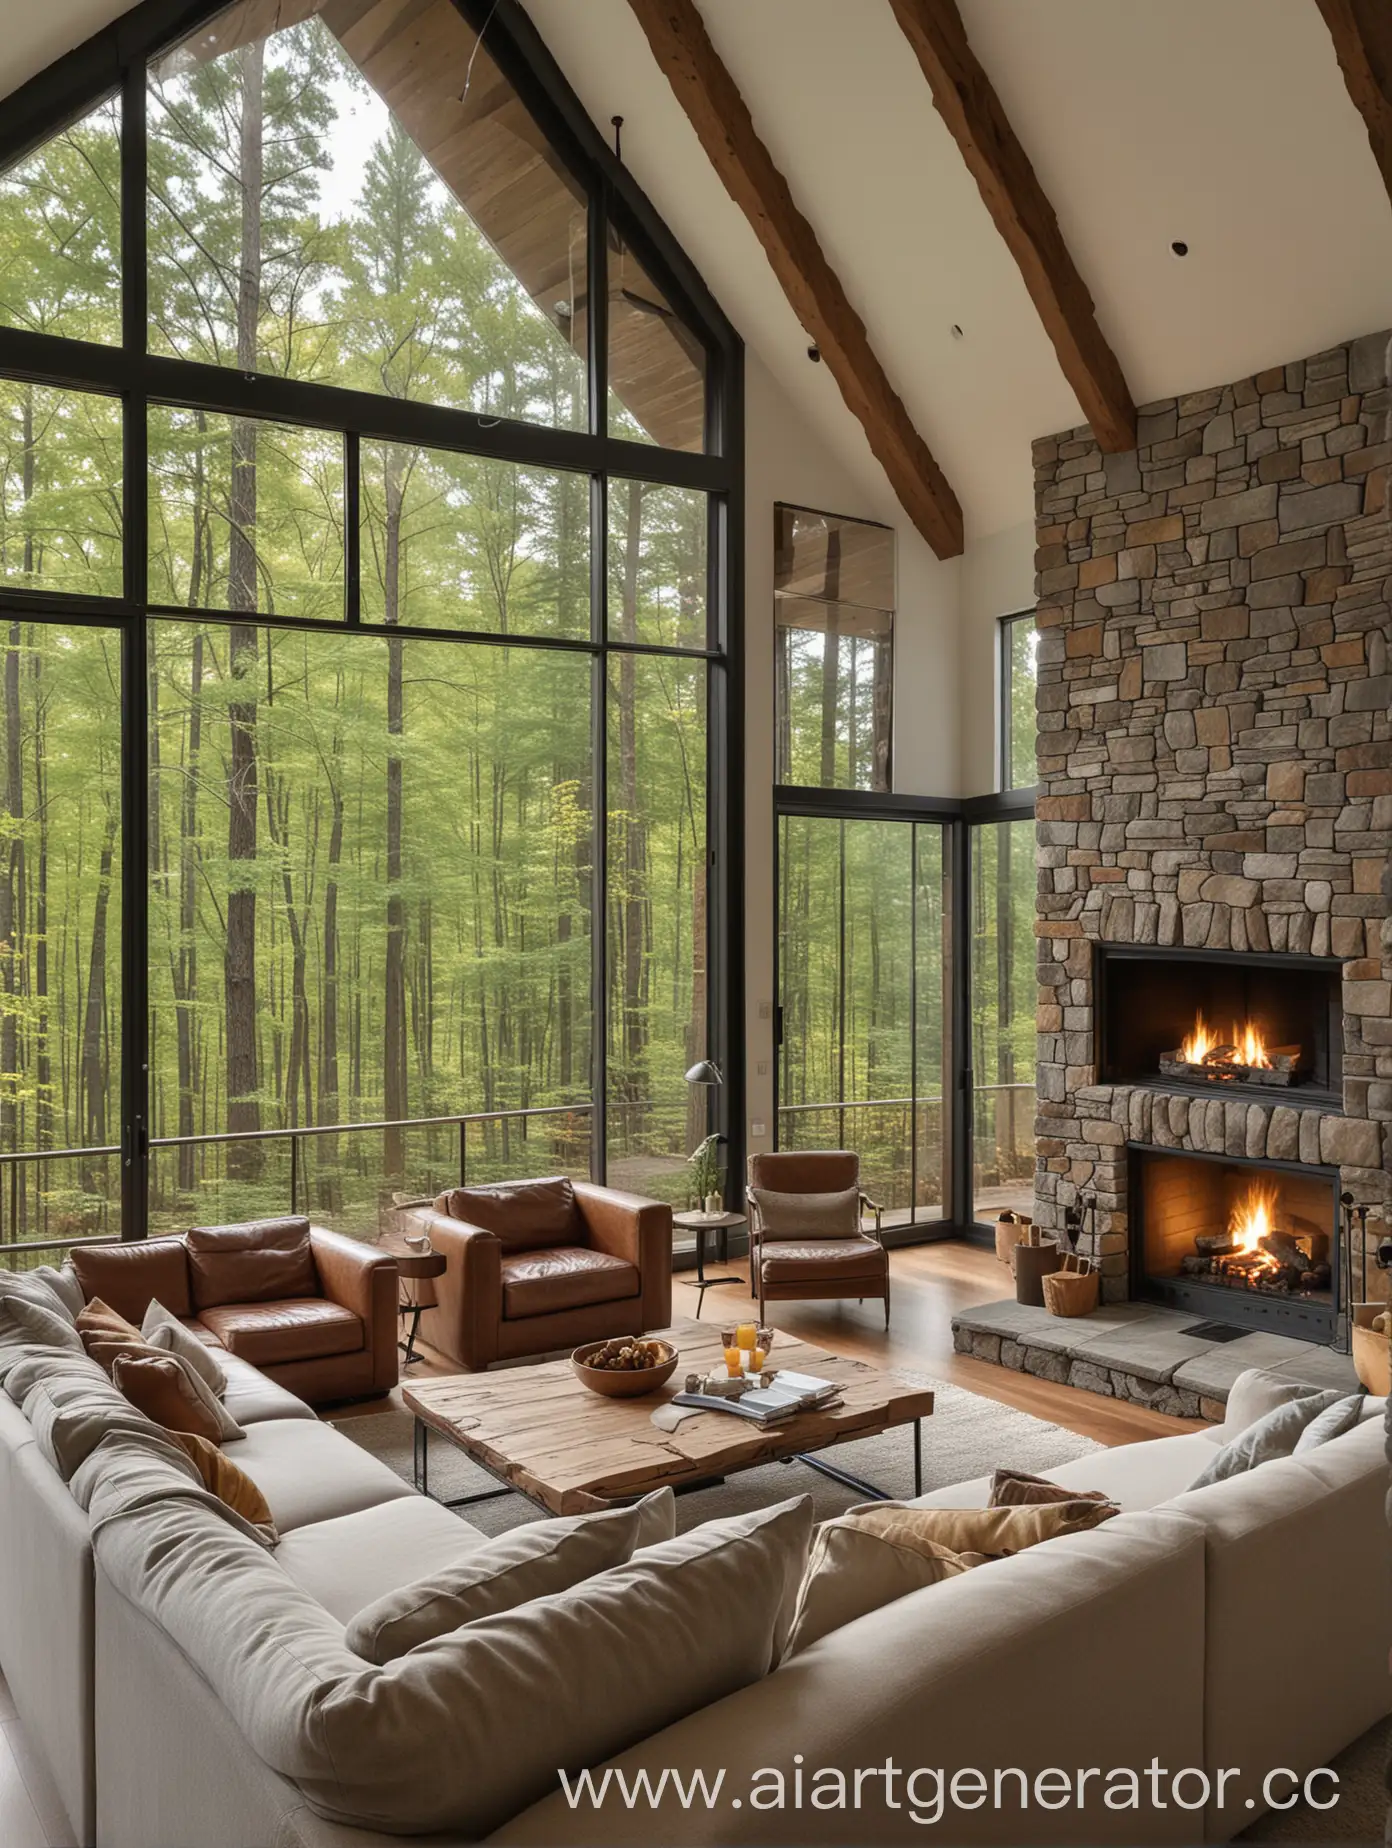 Cozy-Living-Room-with-Fireplace-Overlooking-Forest-View